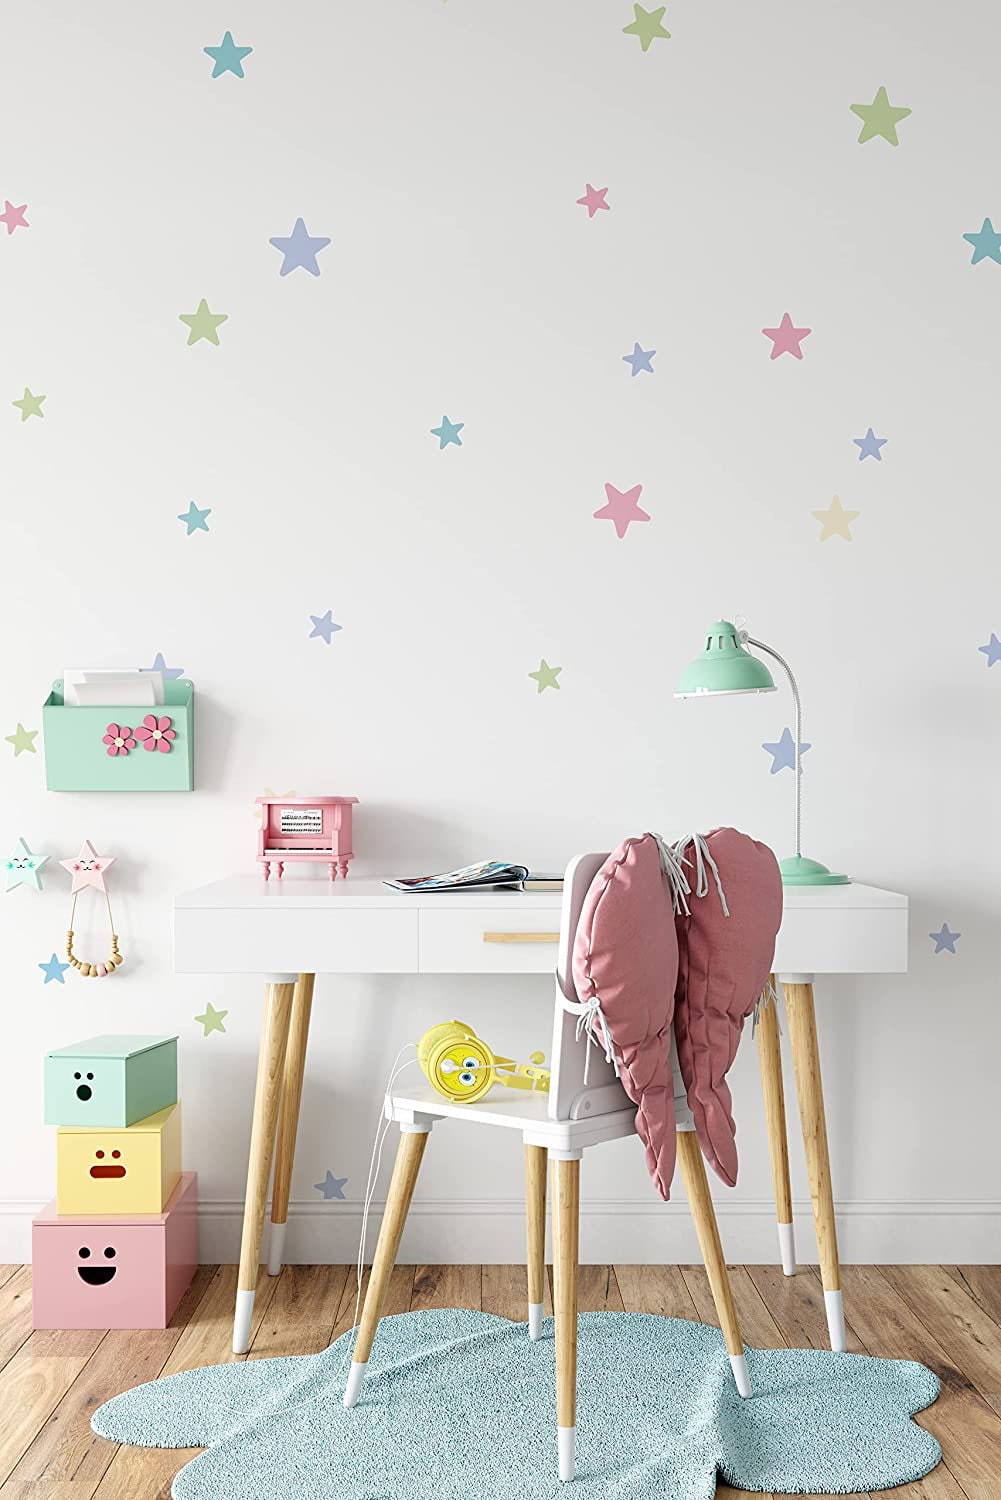 Star Stickers For Walls Kids Wall Stickers Decals Pastel Stars Removable Decor